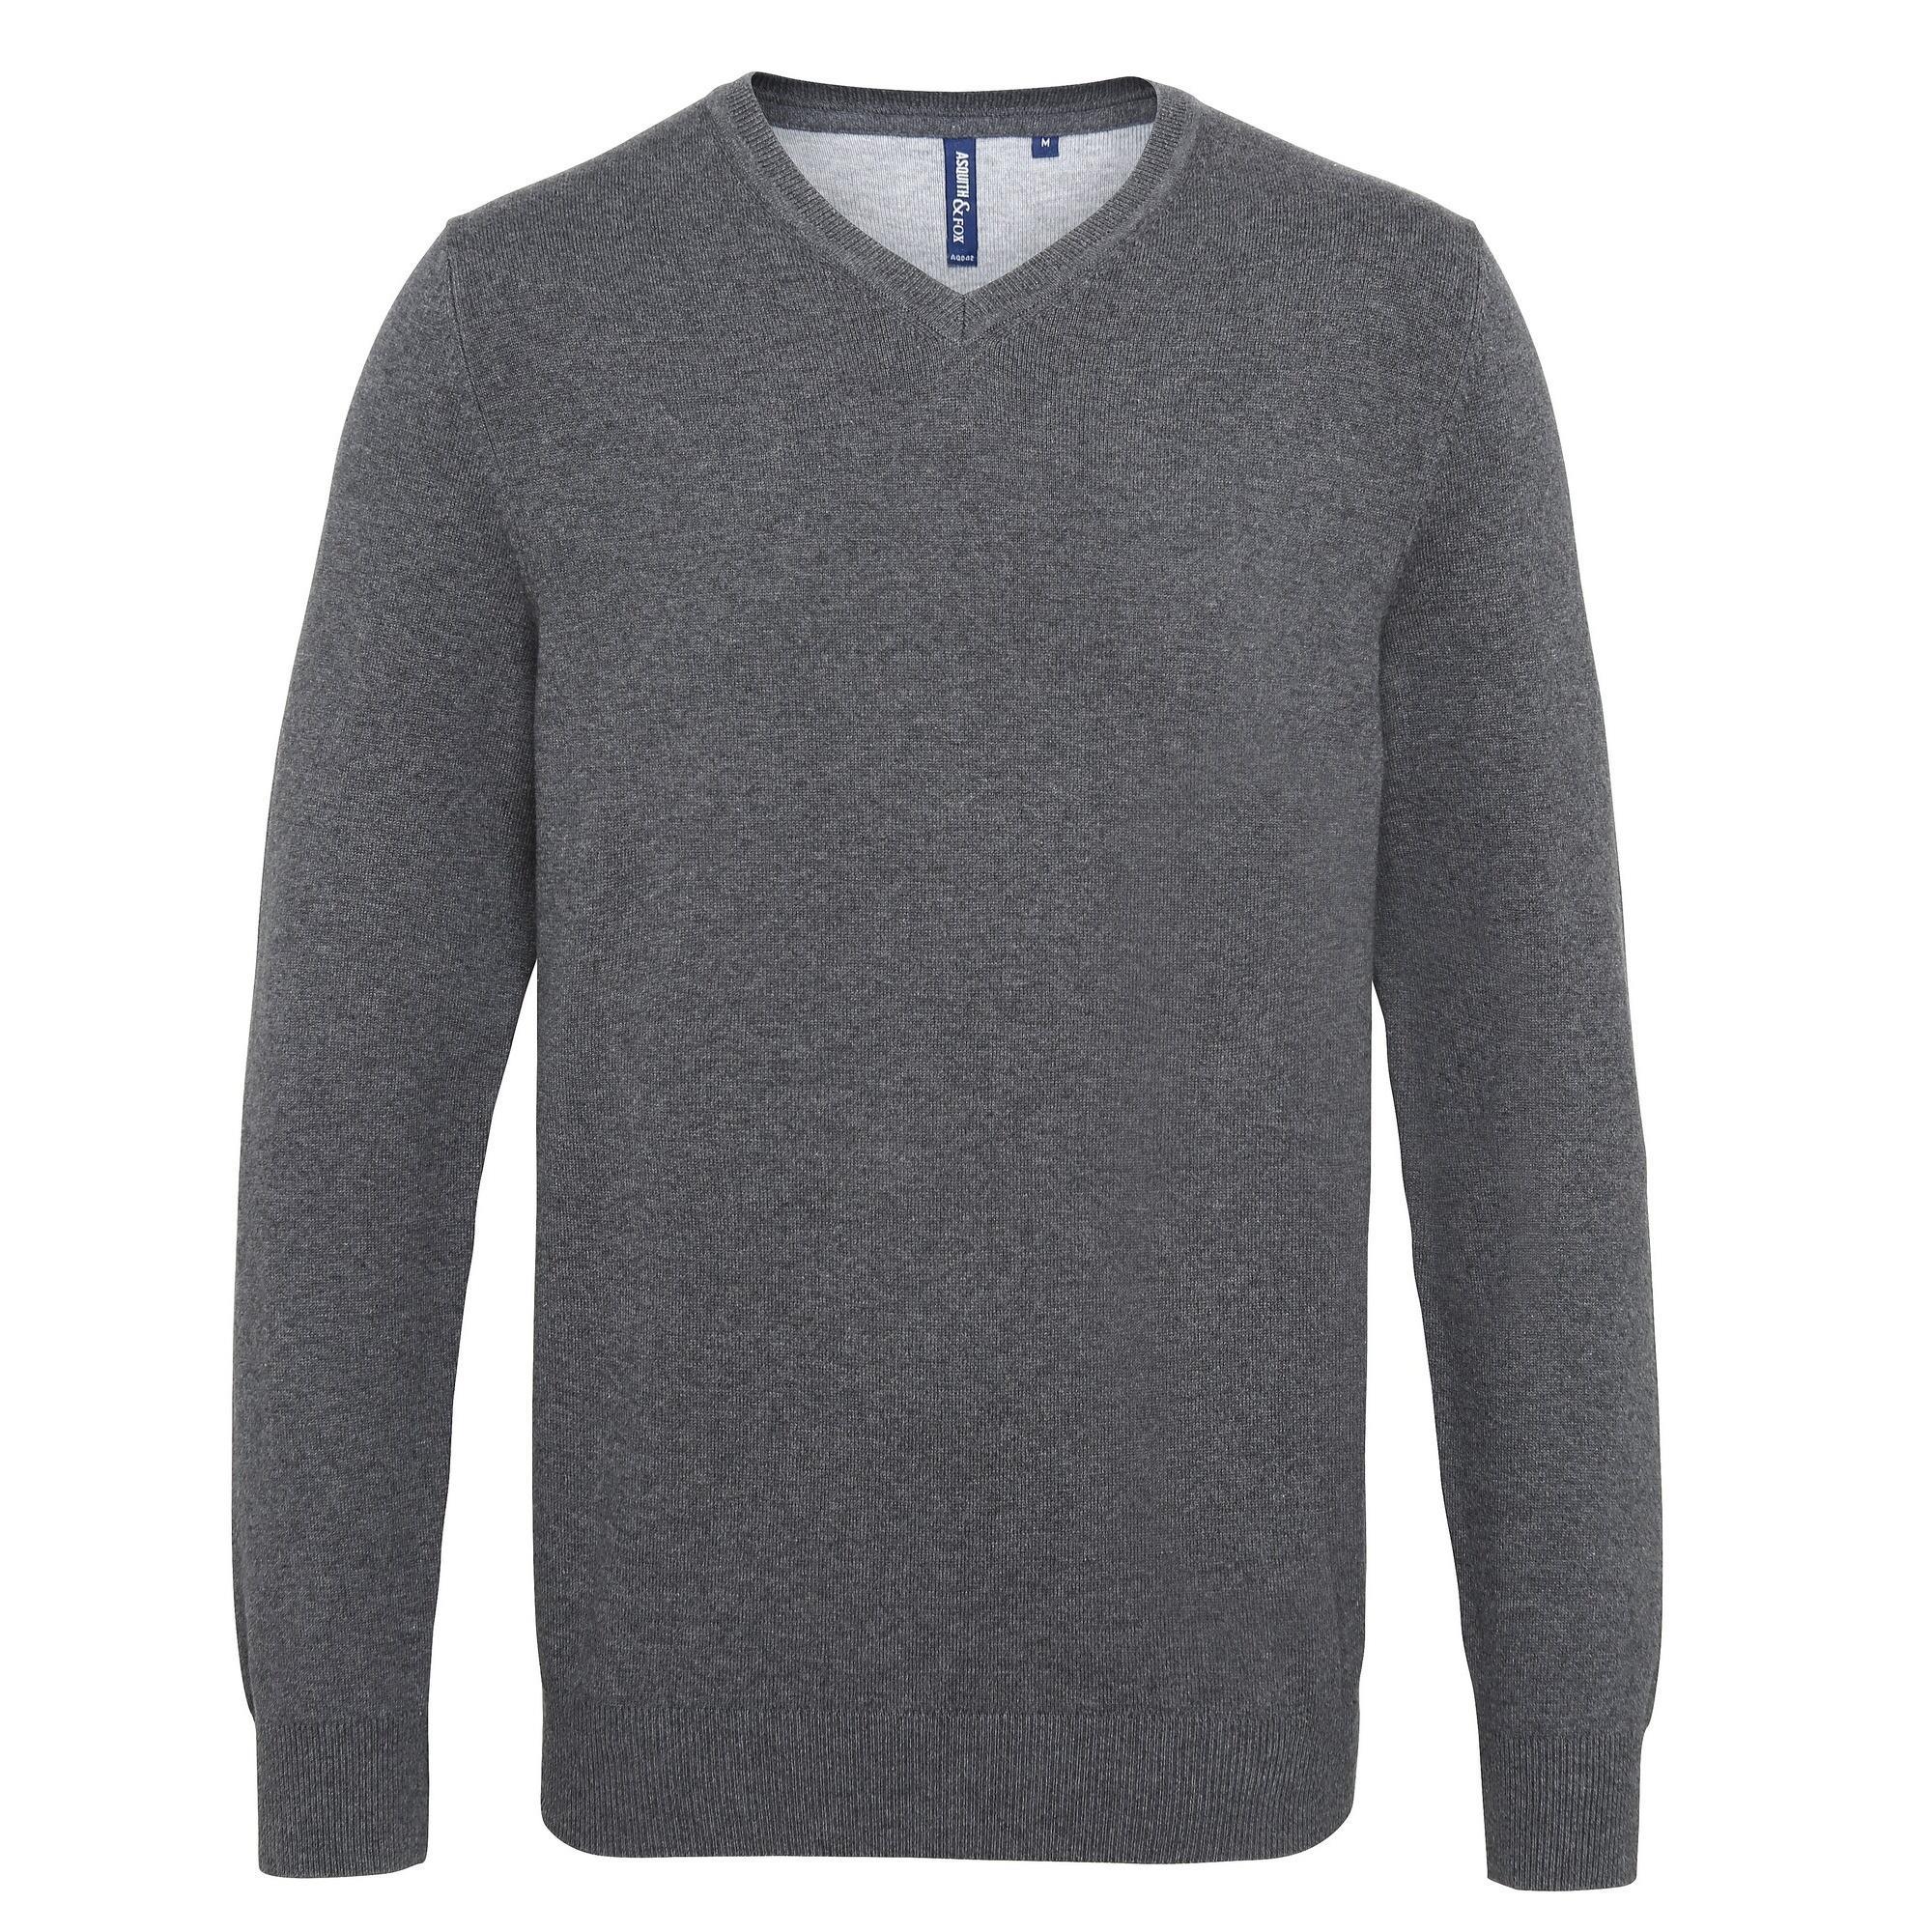 Asquith & Fox Mens Cotton Rich V-Neck Sweater (Charcoal) (M)